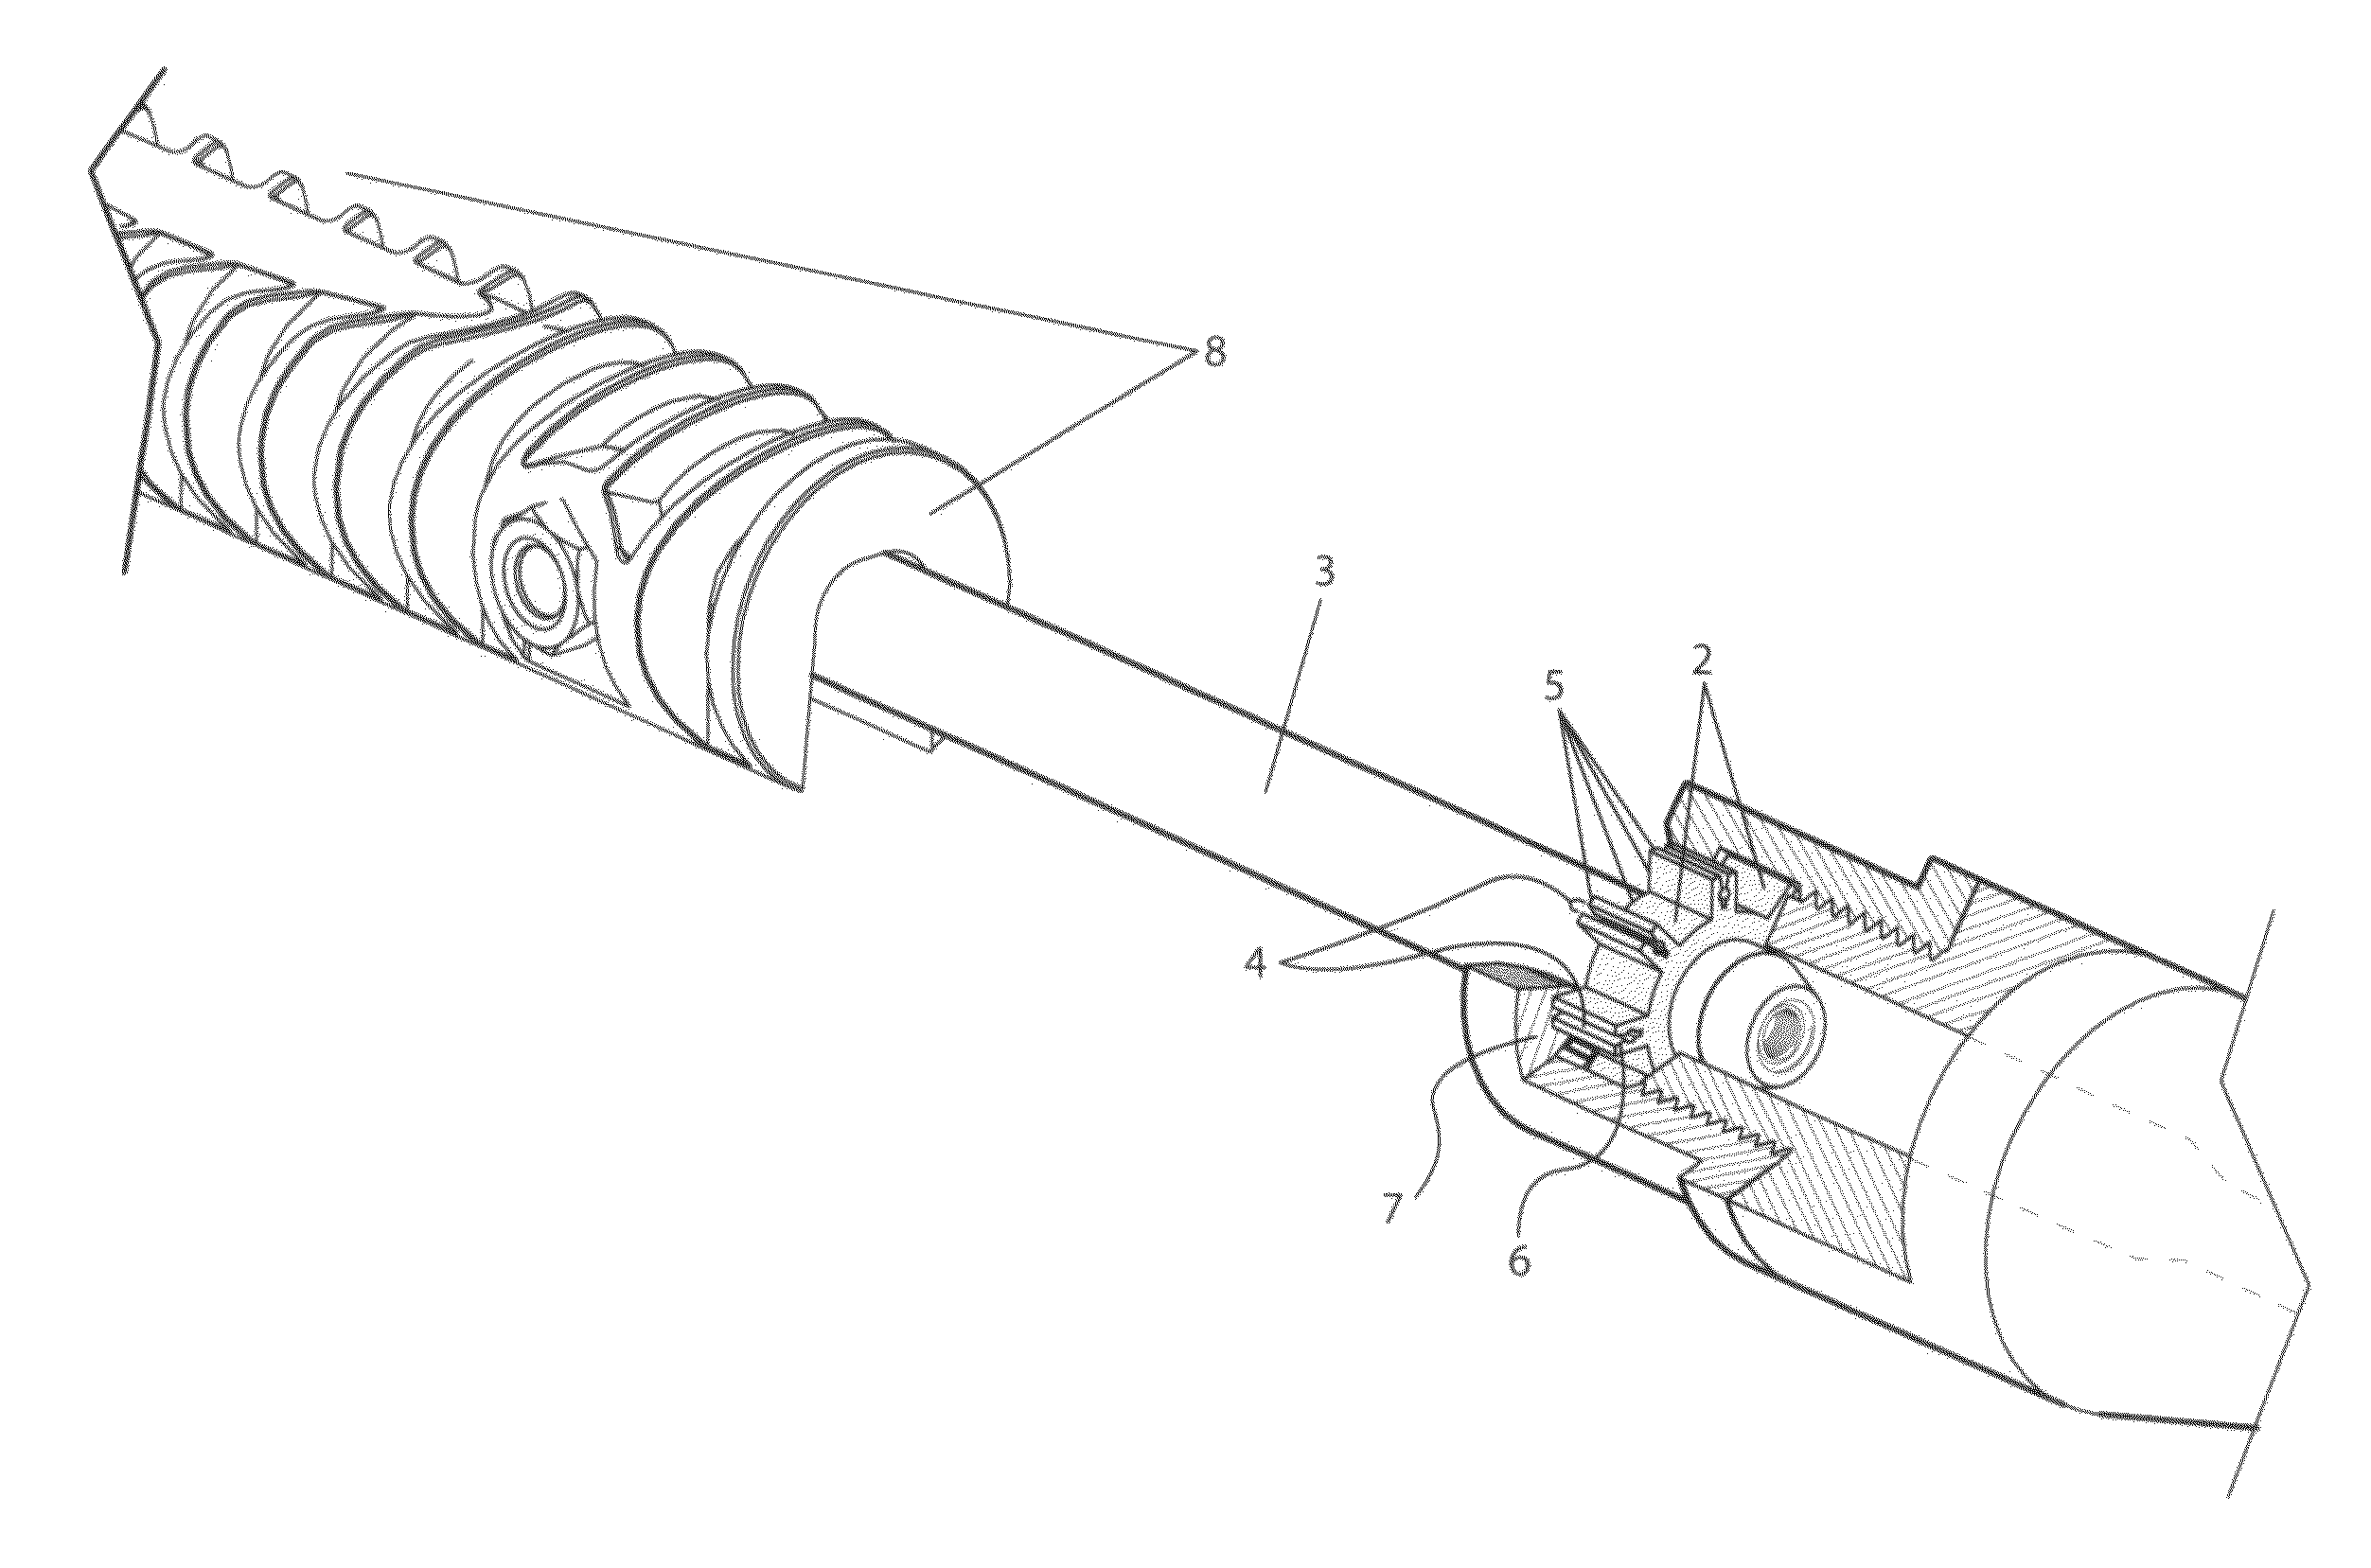 Rifle chamber cleaning tool with debris capturing recesses